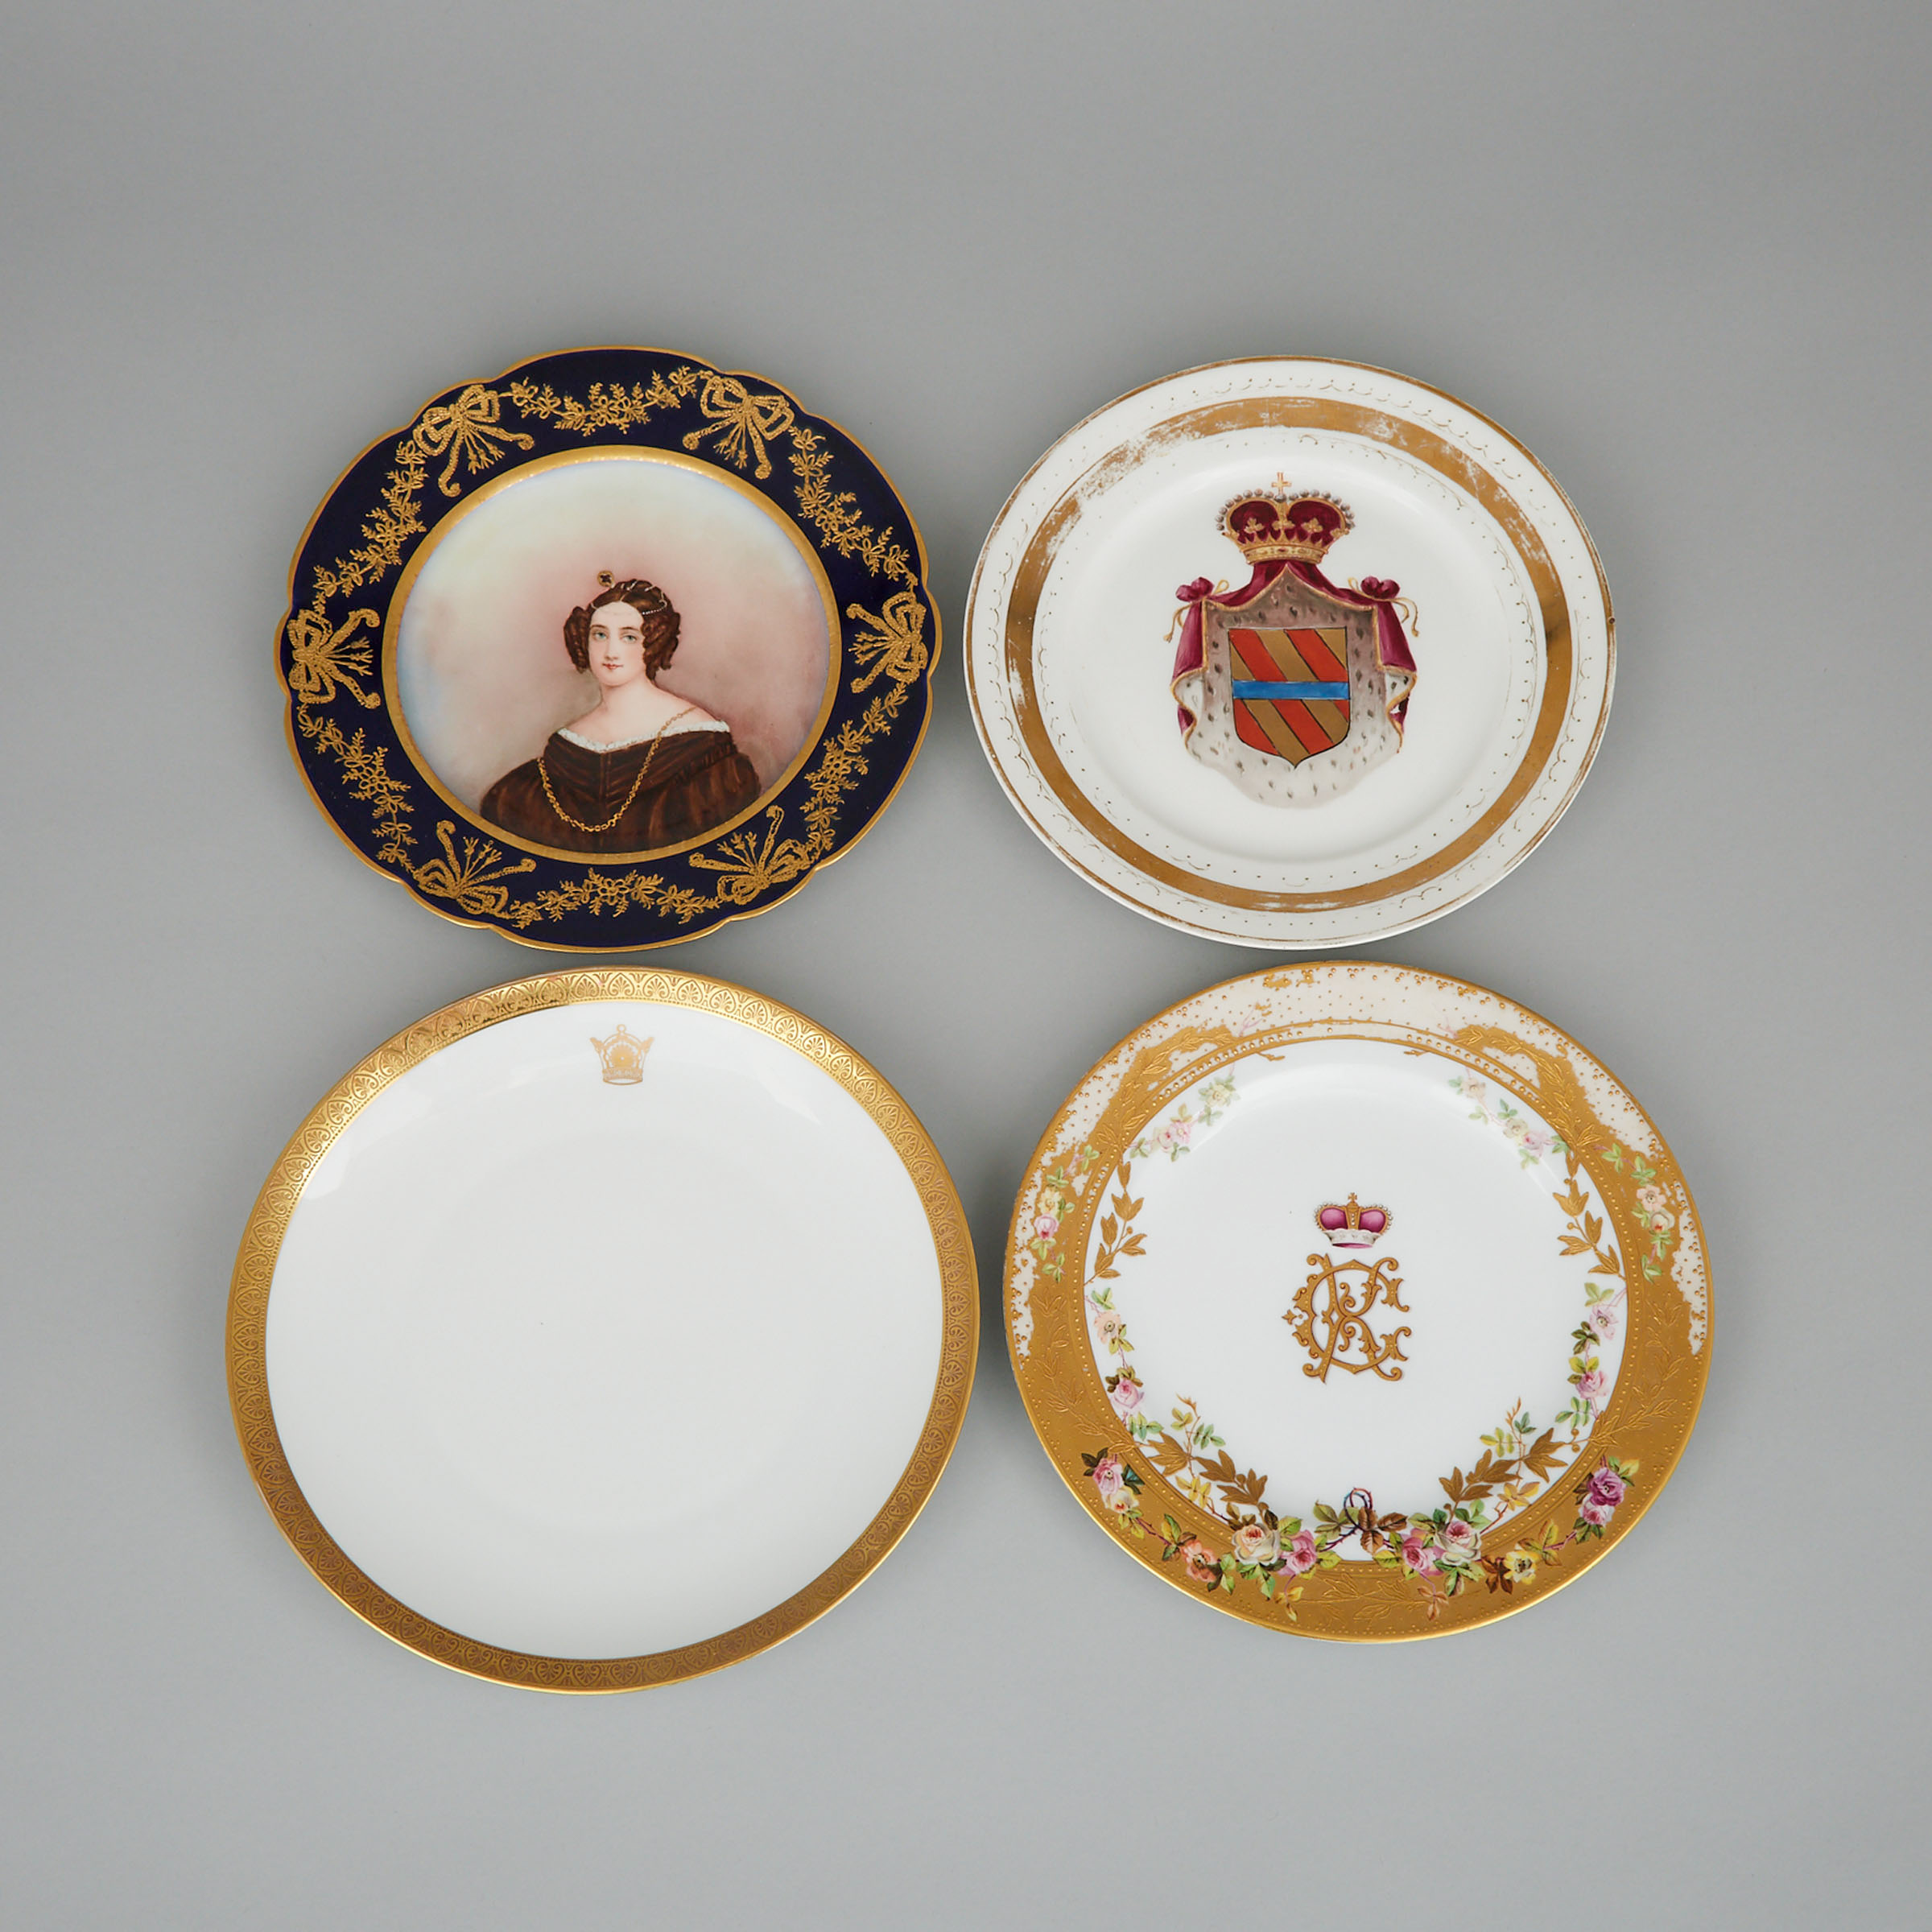 Group of Four Continental Armorial and Portrait Plates, 20th century